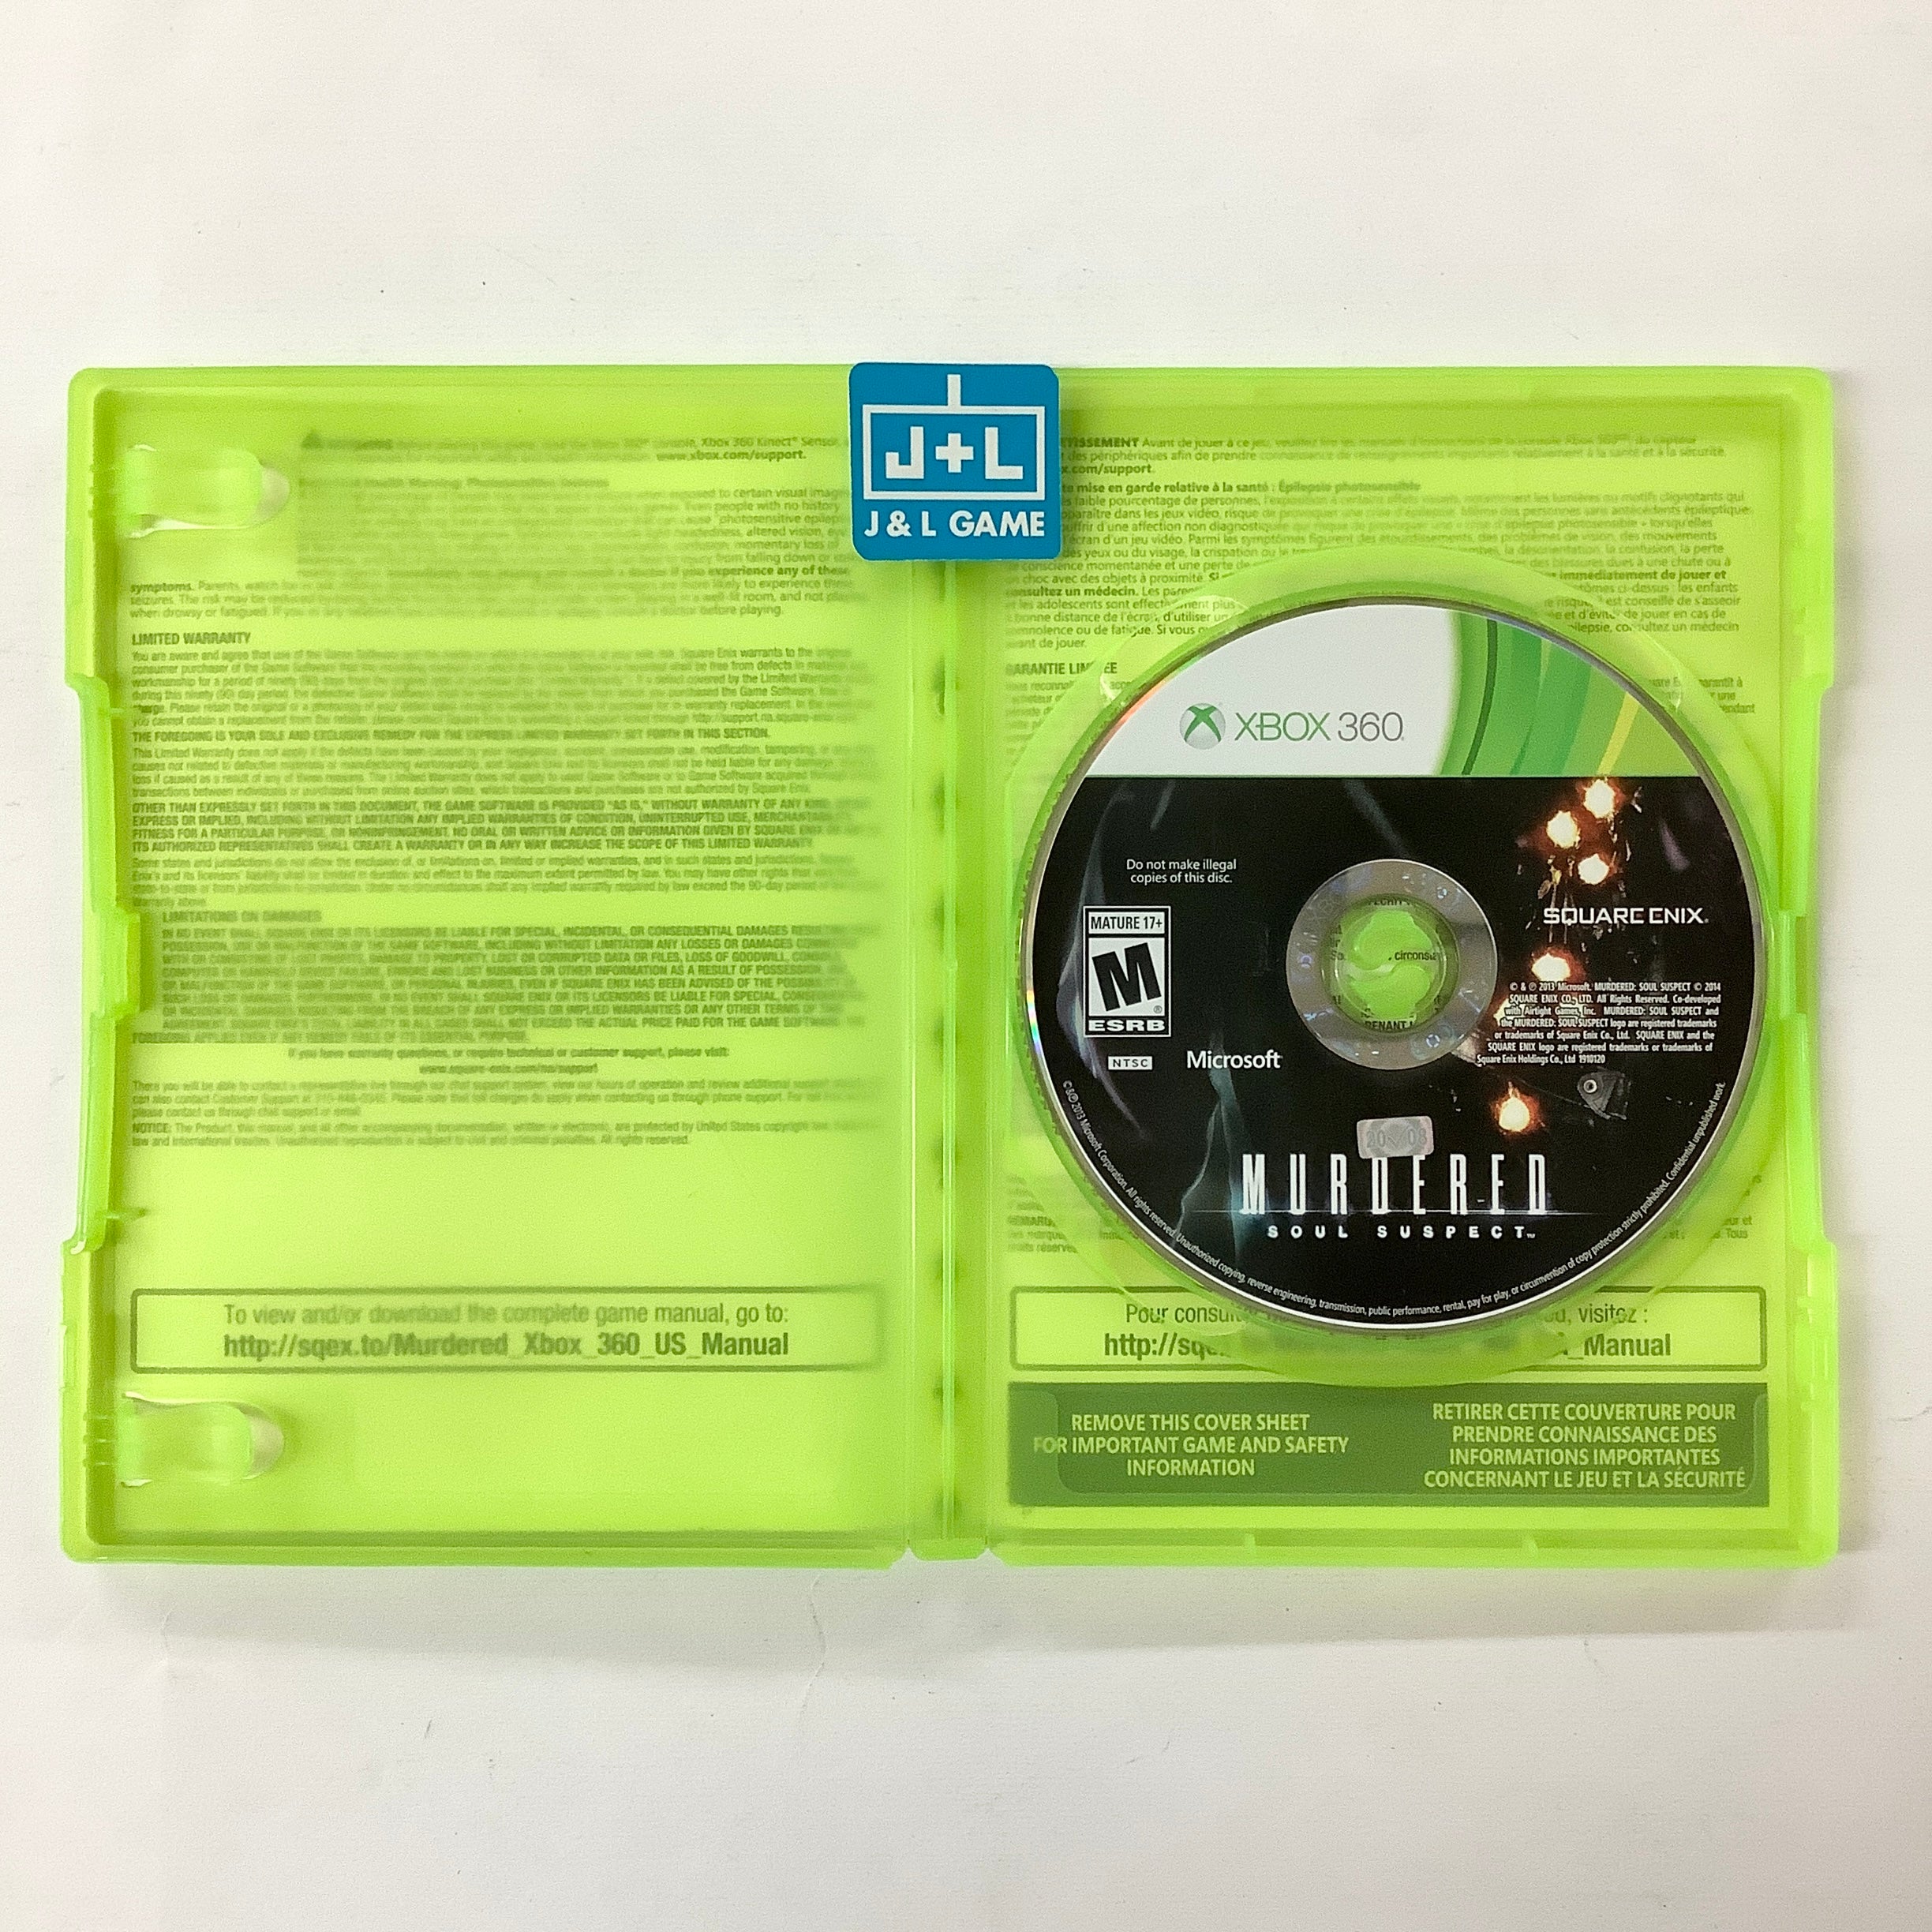 Murdered: Soul Suspect - Xbox 360 [Pre-Owned] Video Games Square Enix   